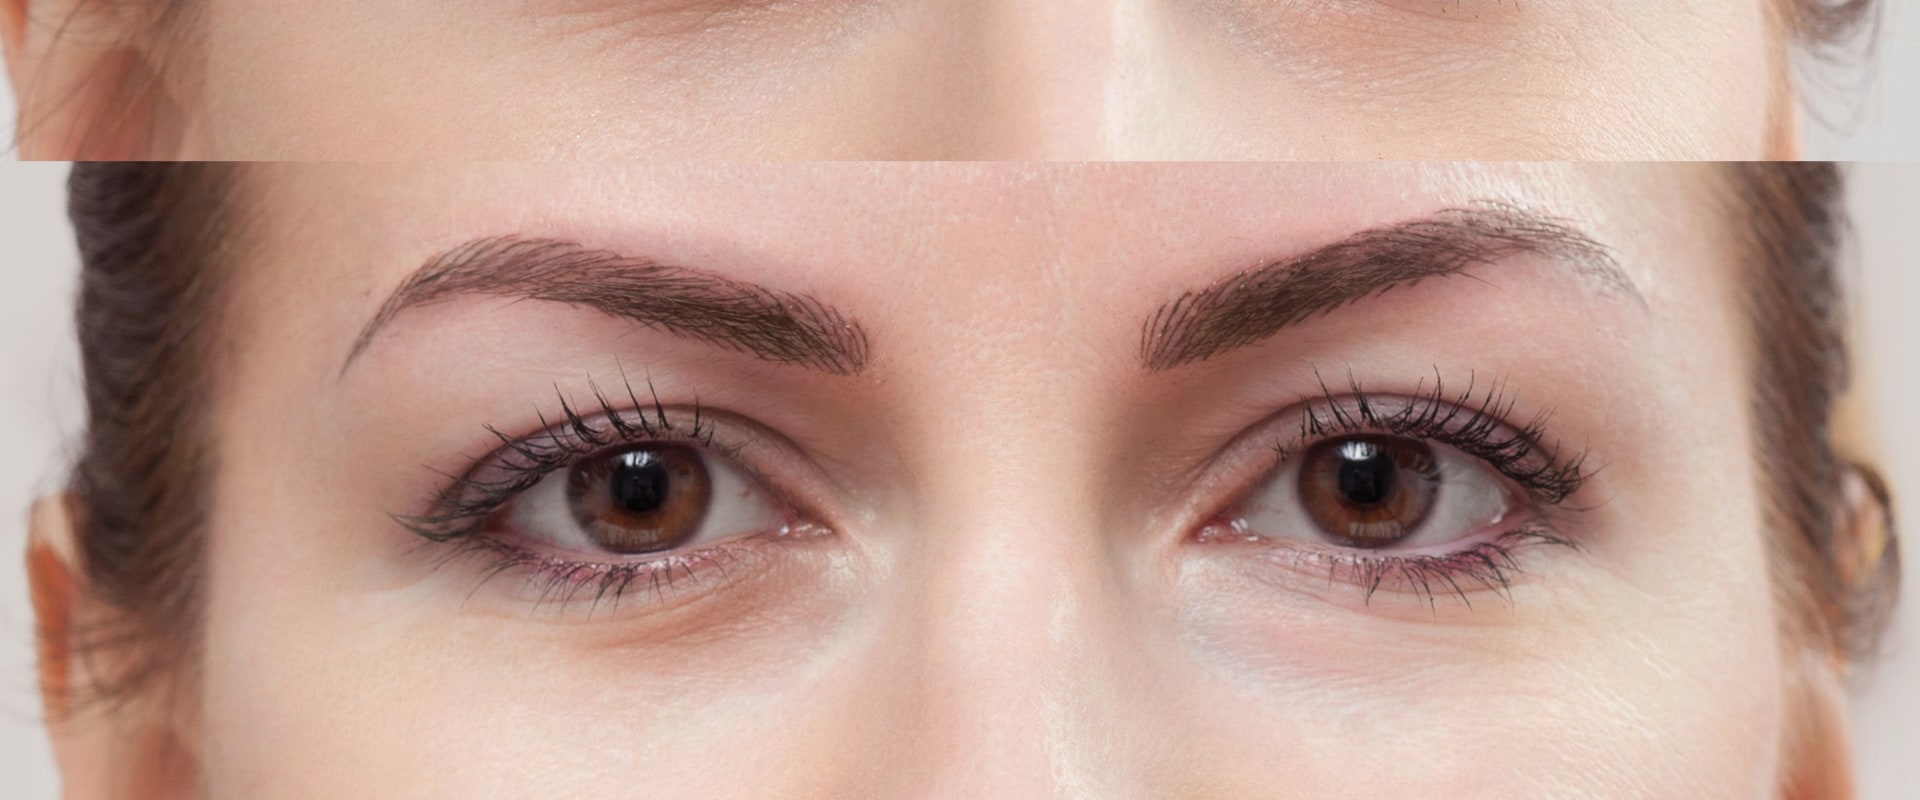 What is better microblading or permanent makeup?